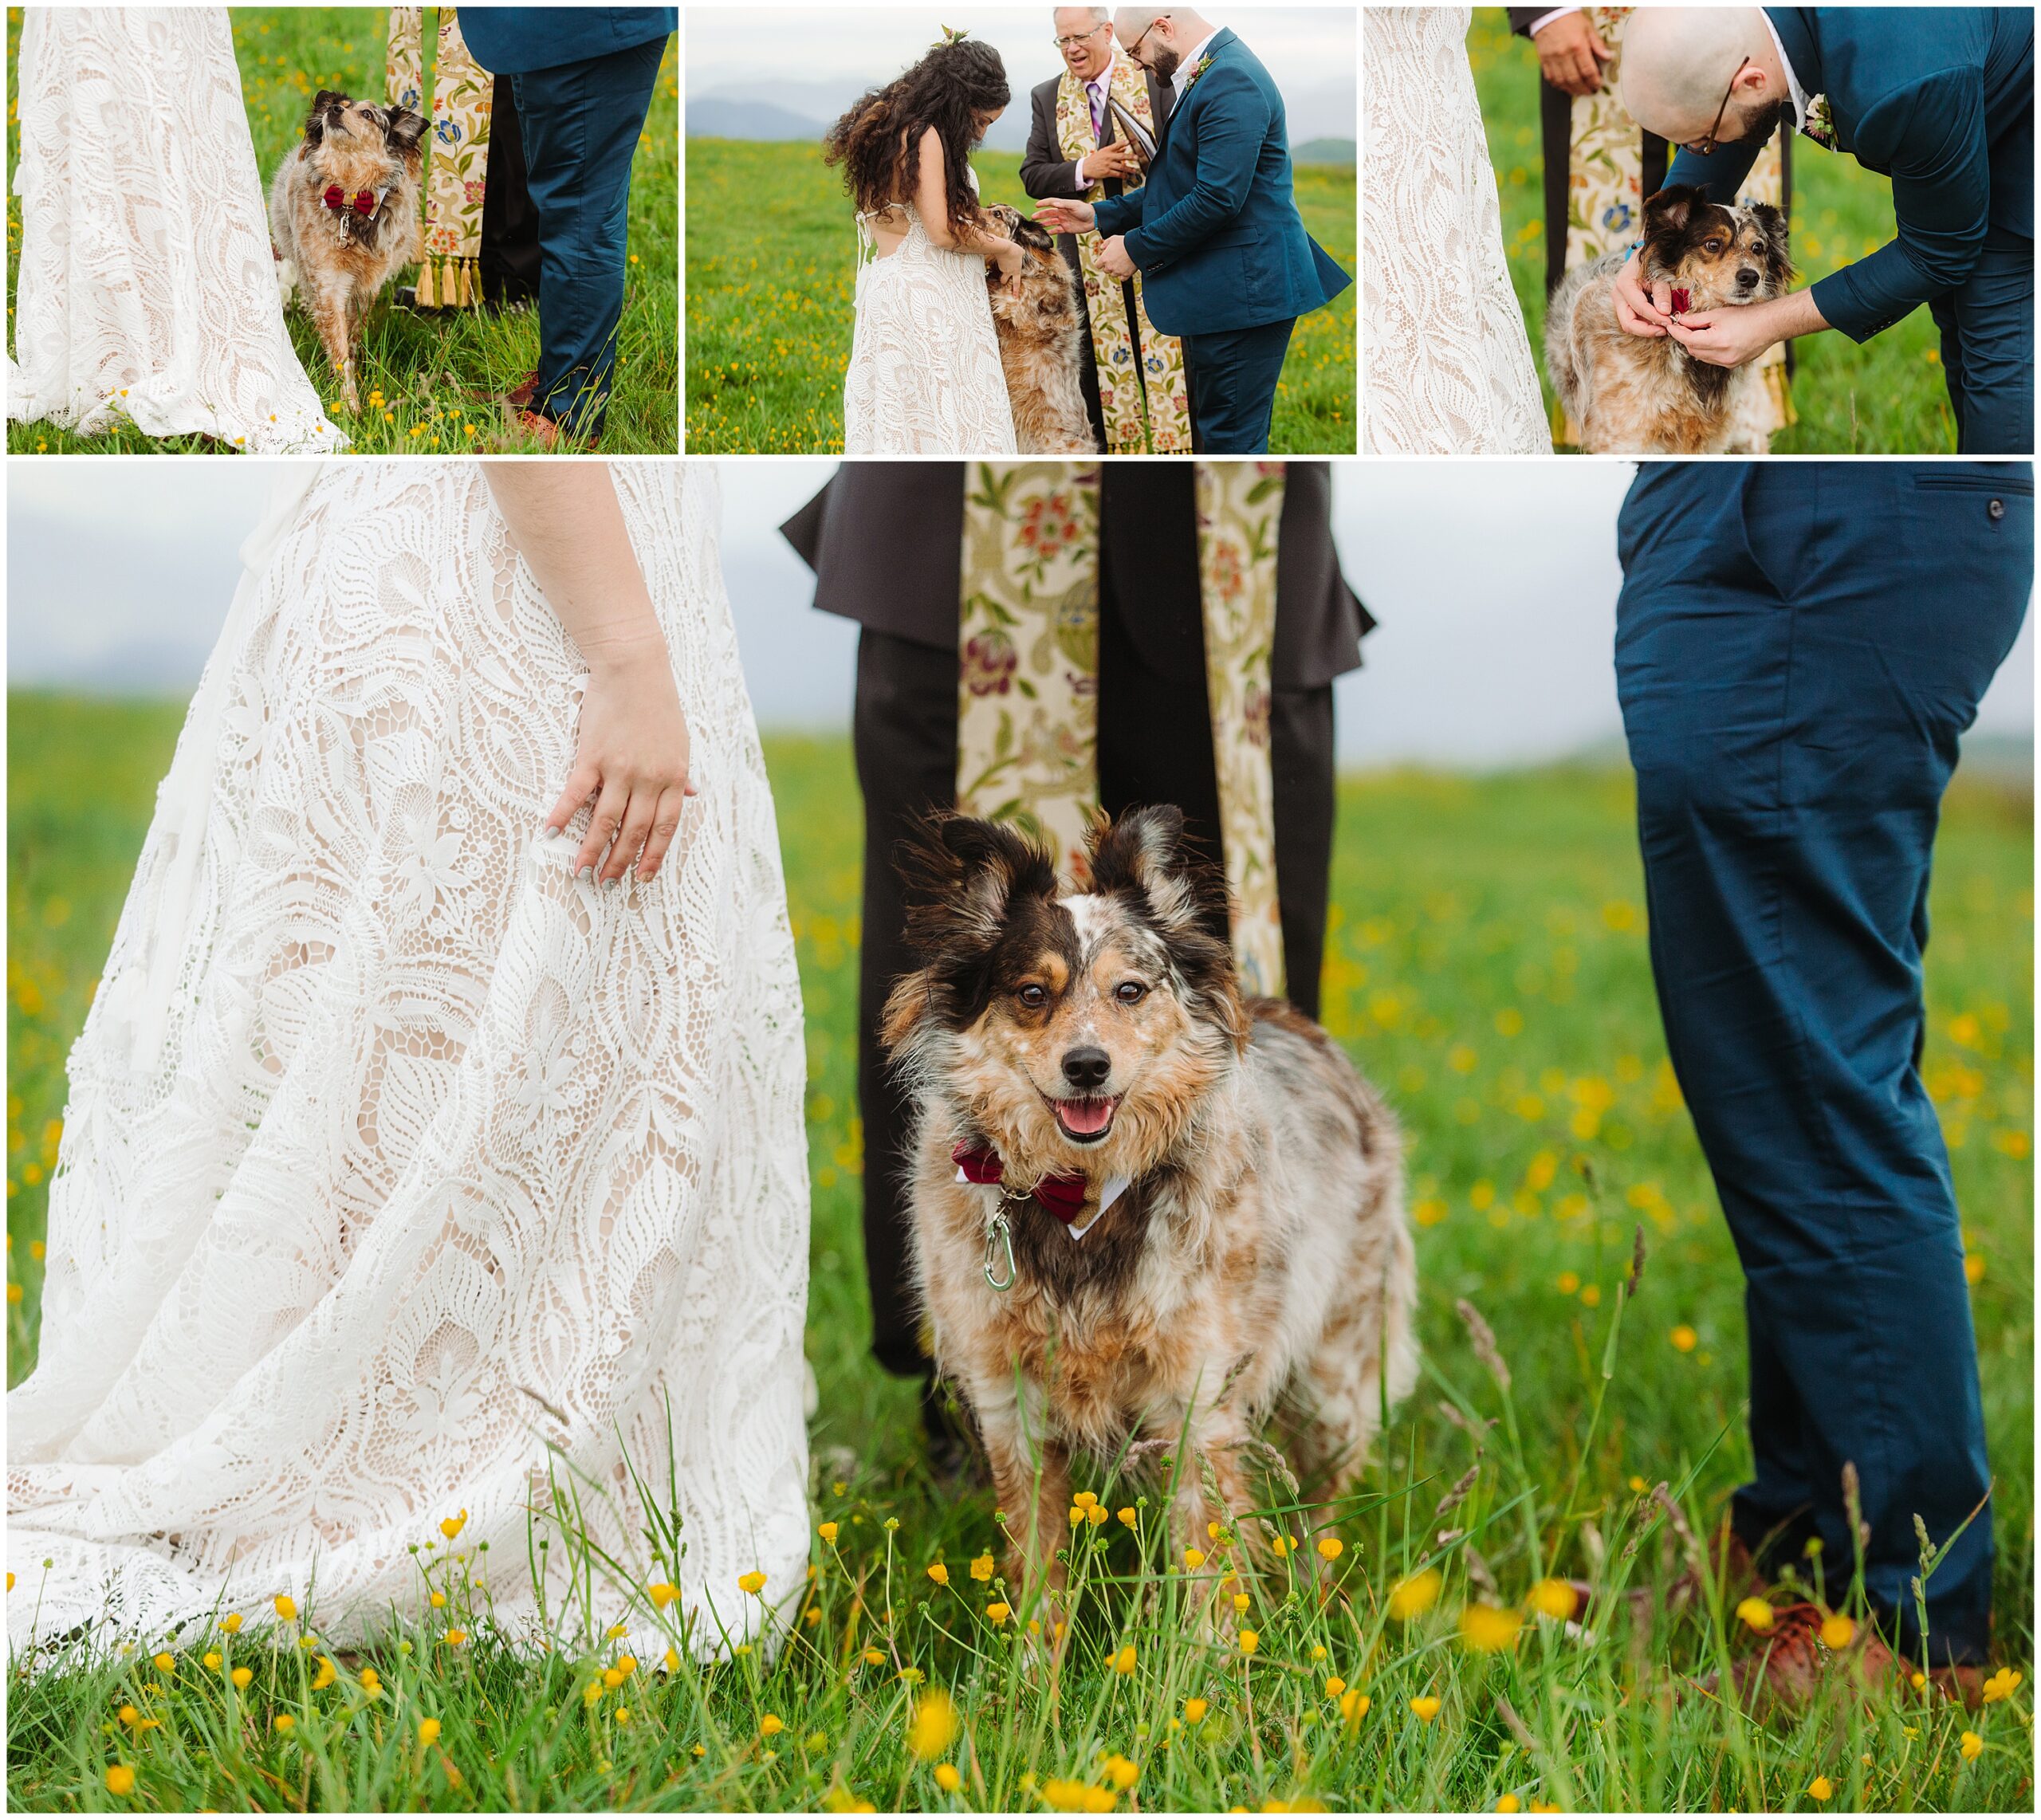 Max Patch Mountain Elopement